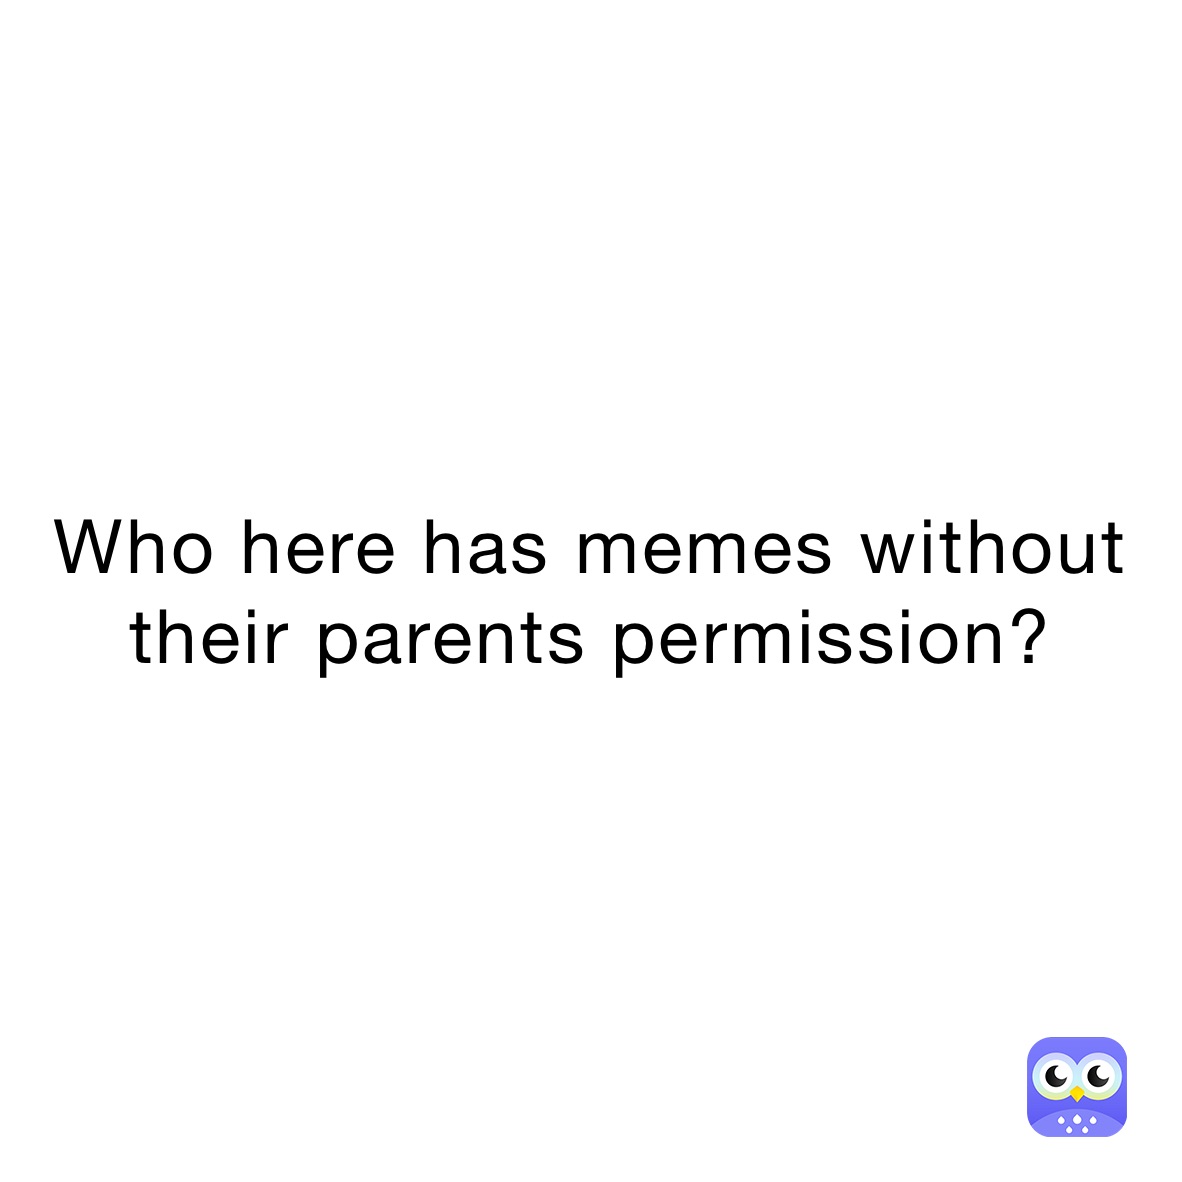 Who here has memes without their parents permission?